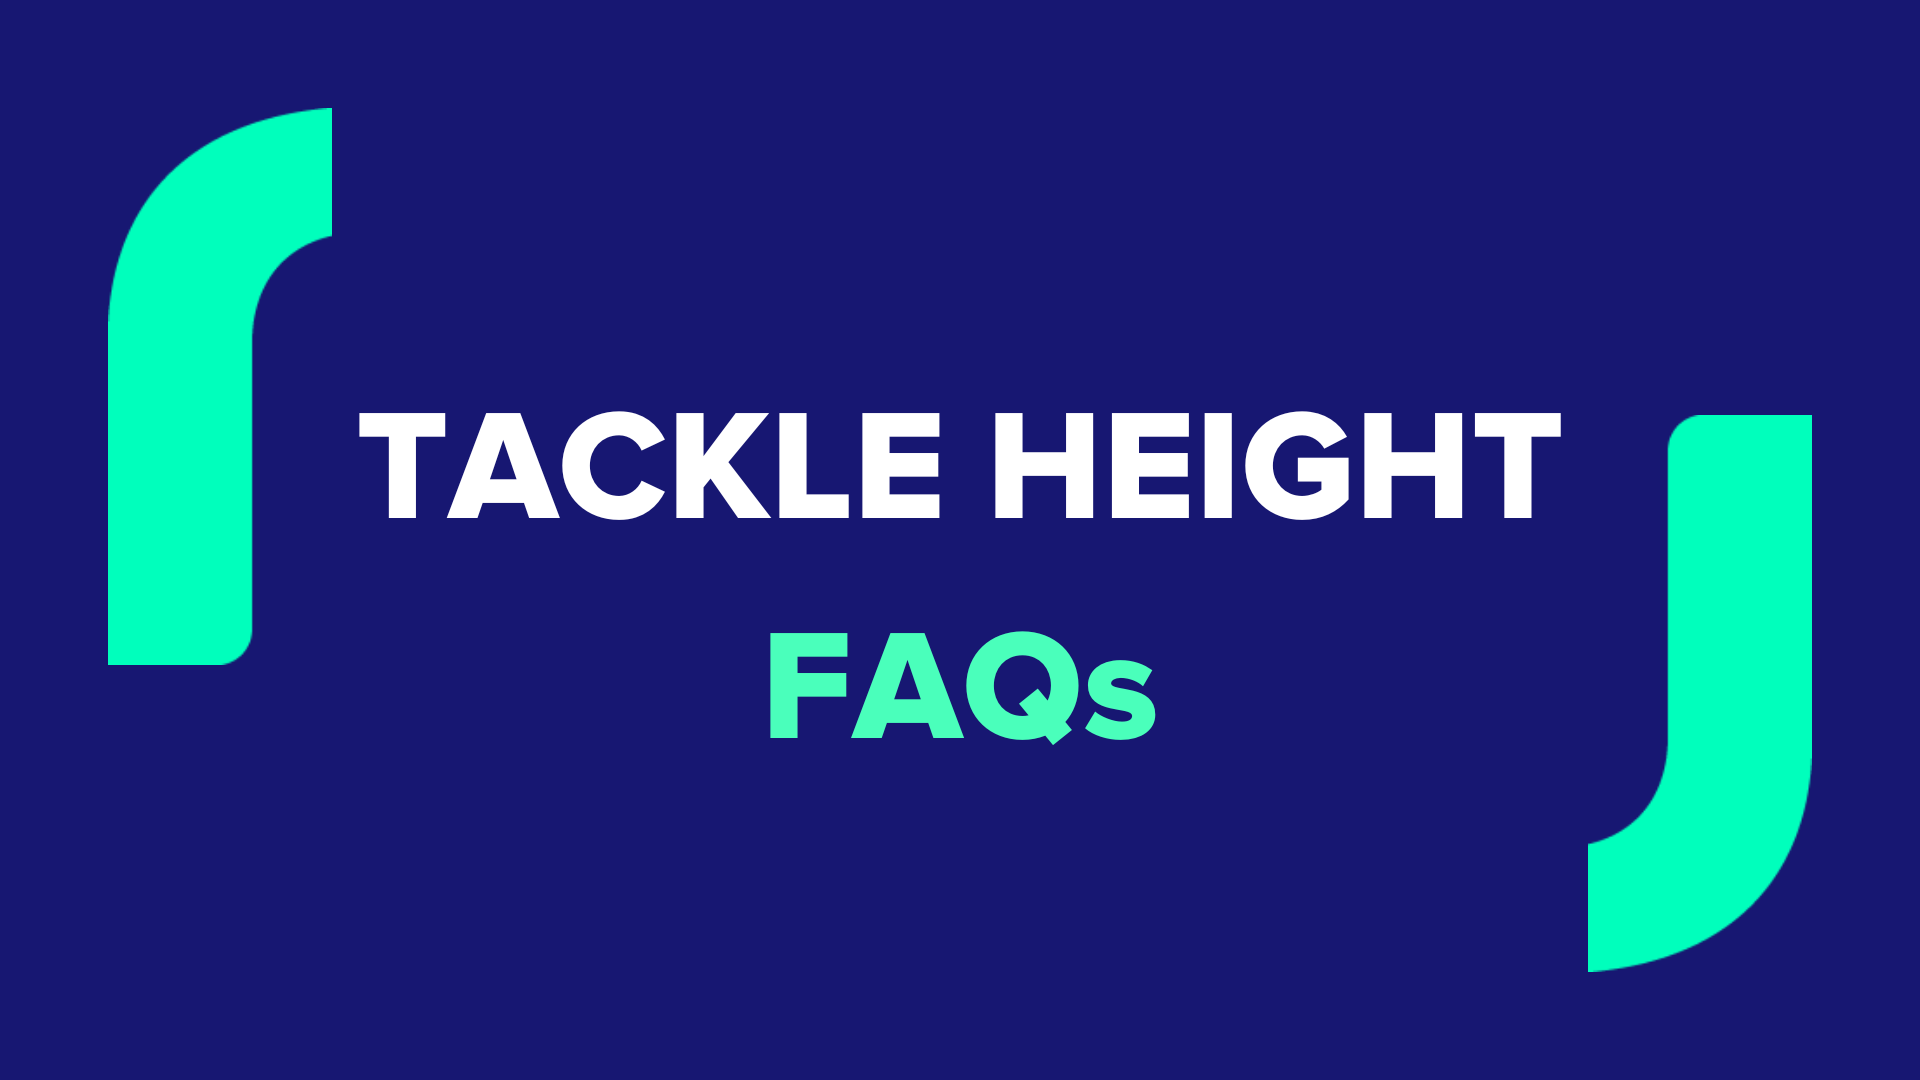 Tackle height FAQs